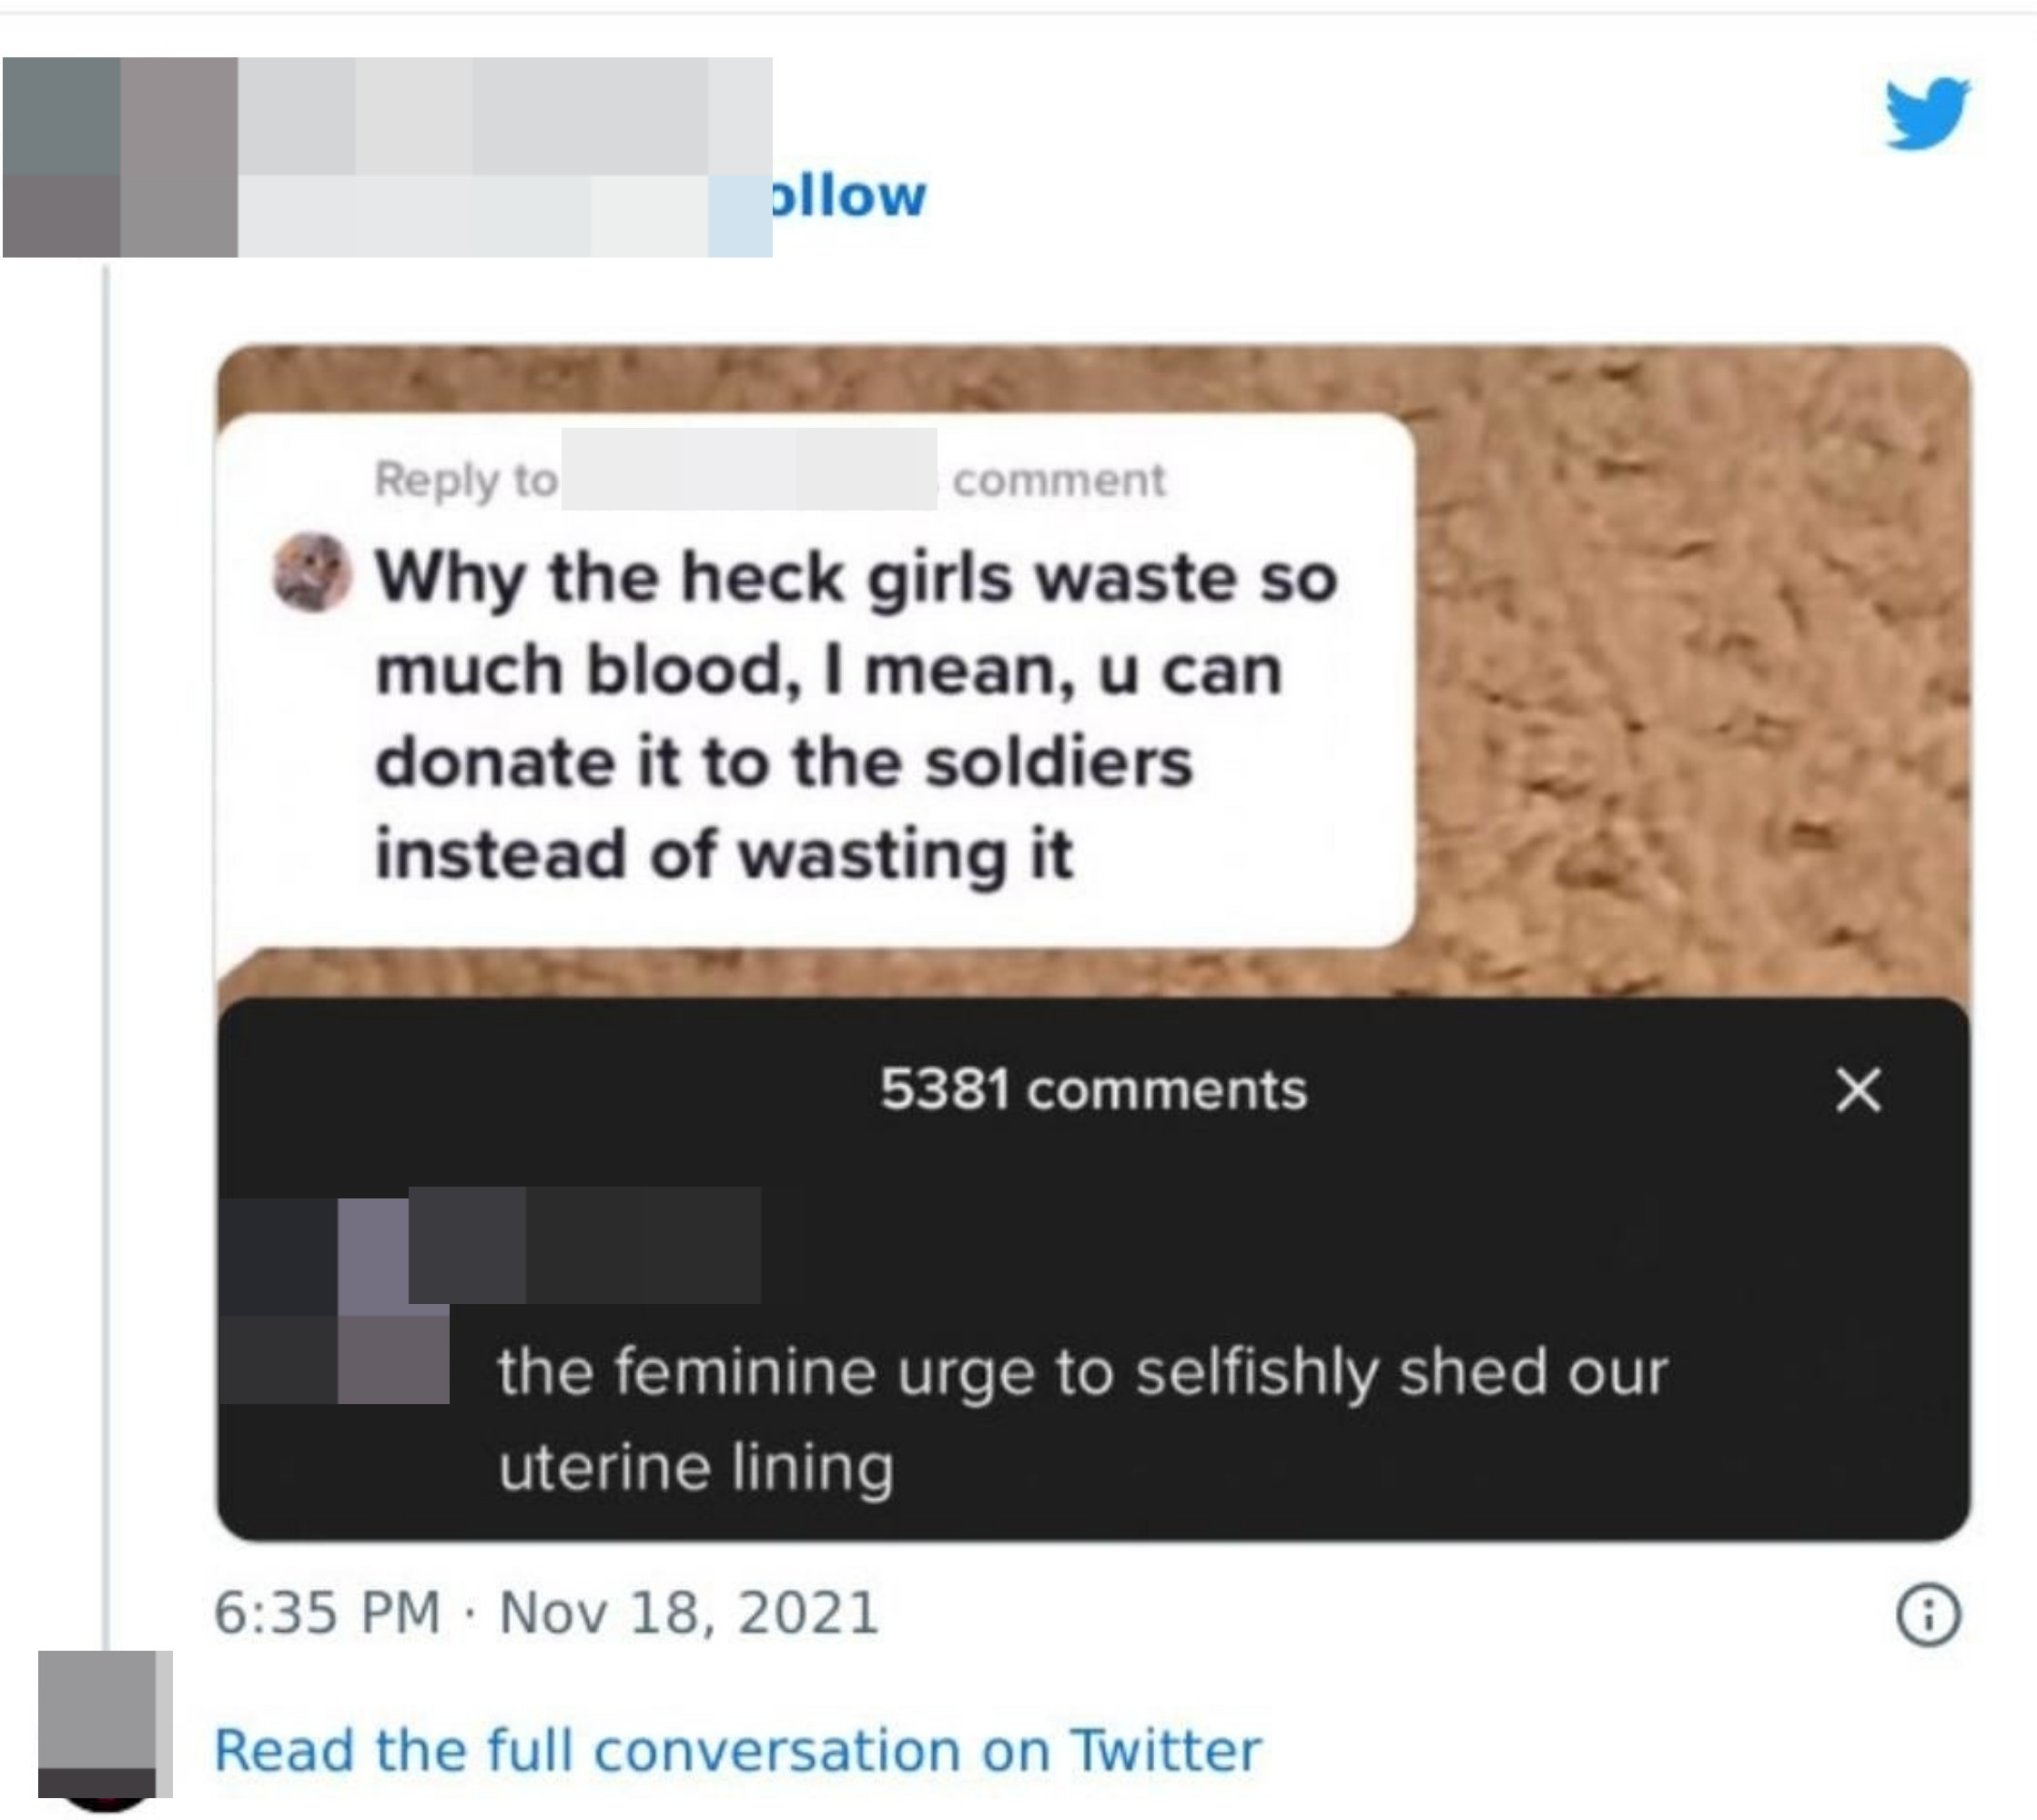 &quot;Why the heck girls waste so much blood, I mean, u can donate it to the soldiers&quot;; response: &quot;the feminine urge to selfishly shed our uterine lining&quot;